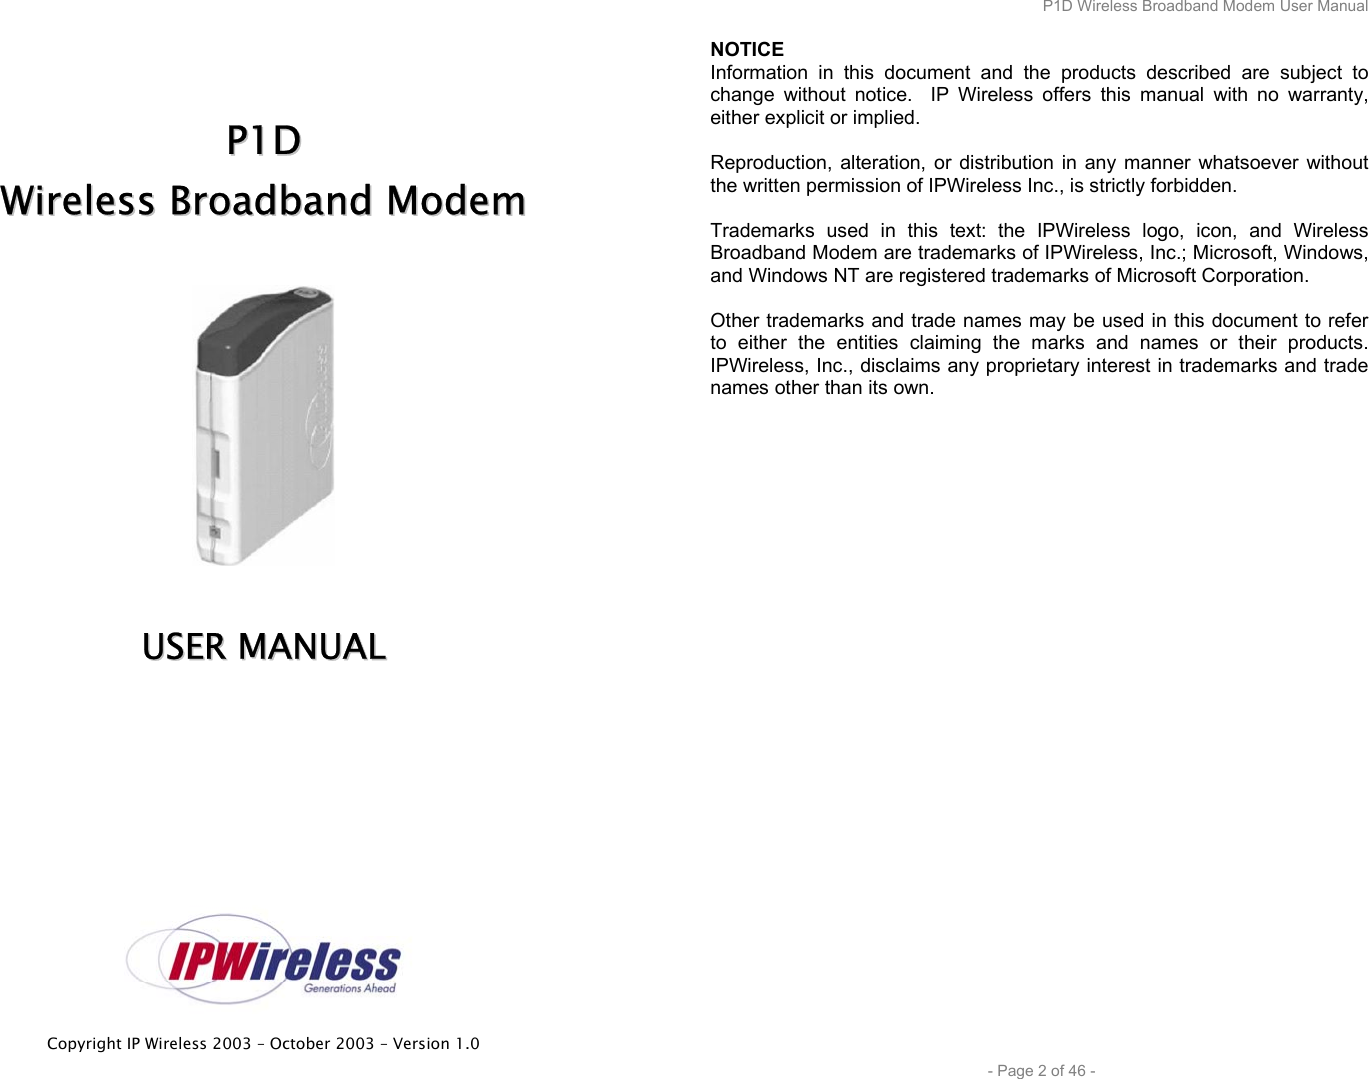  Copyright IP Wireless 2003 – October 2003 – Version 1.0     PP11DD  WWiirreelleessss  BBrrooaaddbbaanndd  MMooddeemm     UUSSEERR  MMAANNUUAALL      P1D Wireless Broadband Modem User Manual  - Page 2 of 46 - NOTICE Information in this document and the products described are subject to change without notice.  IP Wireless offers this manual with no warranty, either explicit or implied.  Reproduction, alteration, or distribution in any manner whatsoever without the written permission of IPWireless Inc., is strictly forbidden.  Trademarks used in this text: the IPWireless logo, icon, and Wireless Broadband Modem are trademarks of IPWireless, Inc.; Microsoft, Windows, and Windows NT are registered trademarks of Microsoft Corporation.  Other trademarks and trade names may be used in this document to refer to either the entities claiming the marks and names or their products. IPWireless, Inc., disclaims any proprietary interest in trademarks and trade names other than its own. 